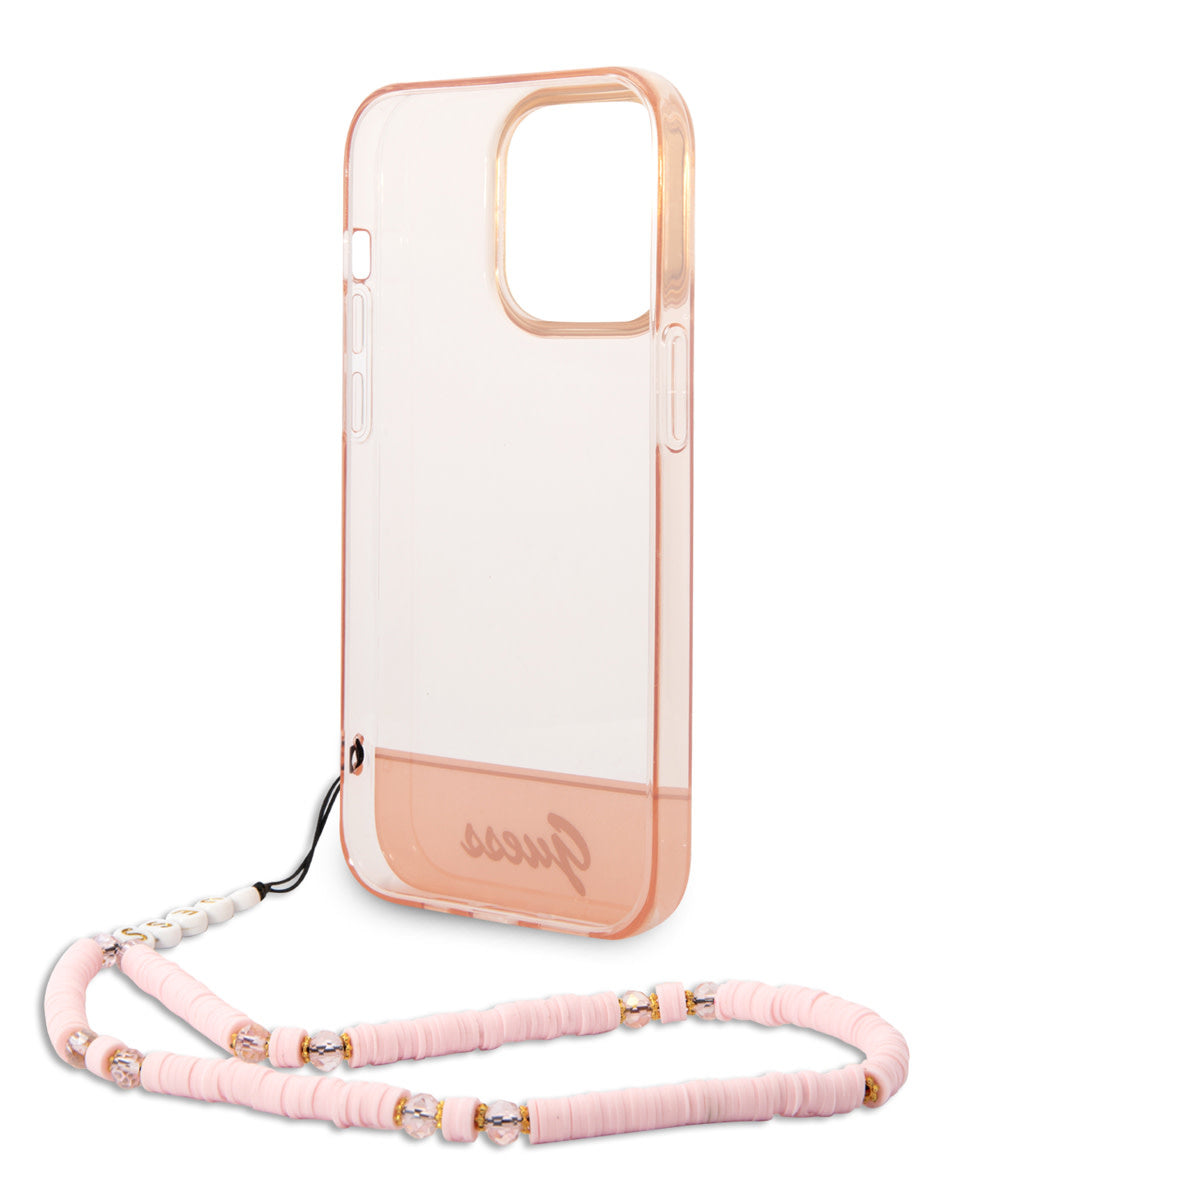 Guess iPhone 14 Pro Max Backcover - met koord - Transparant Roze